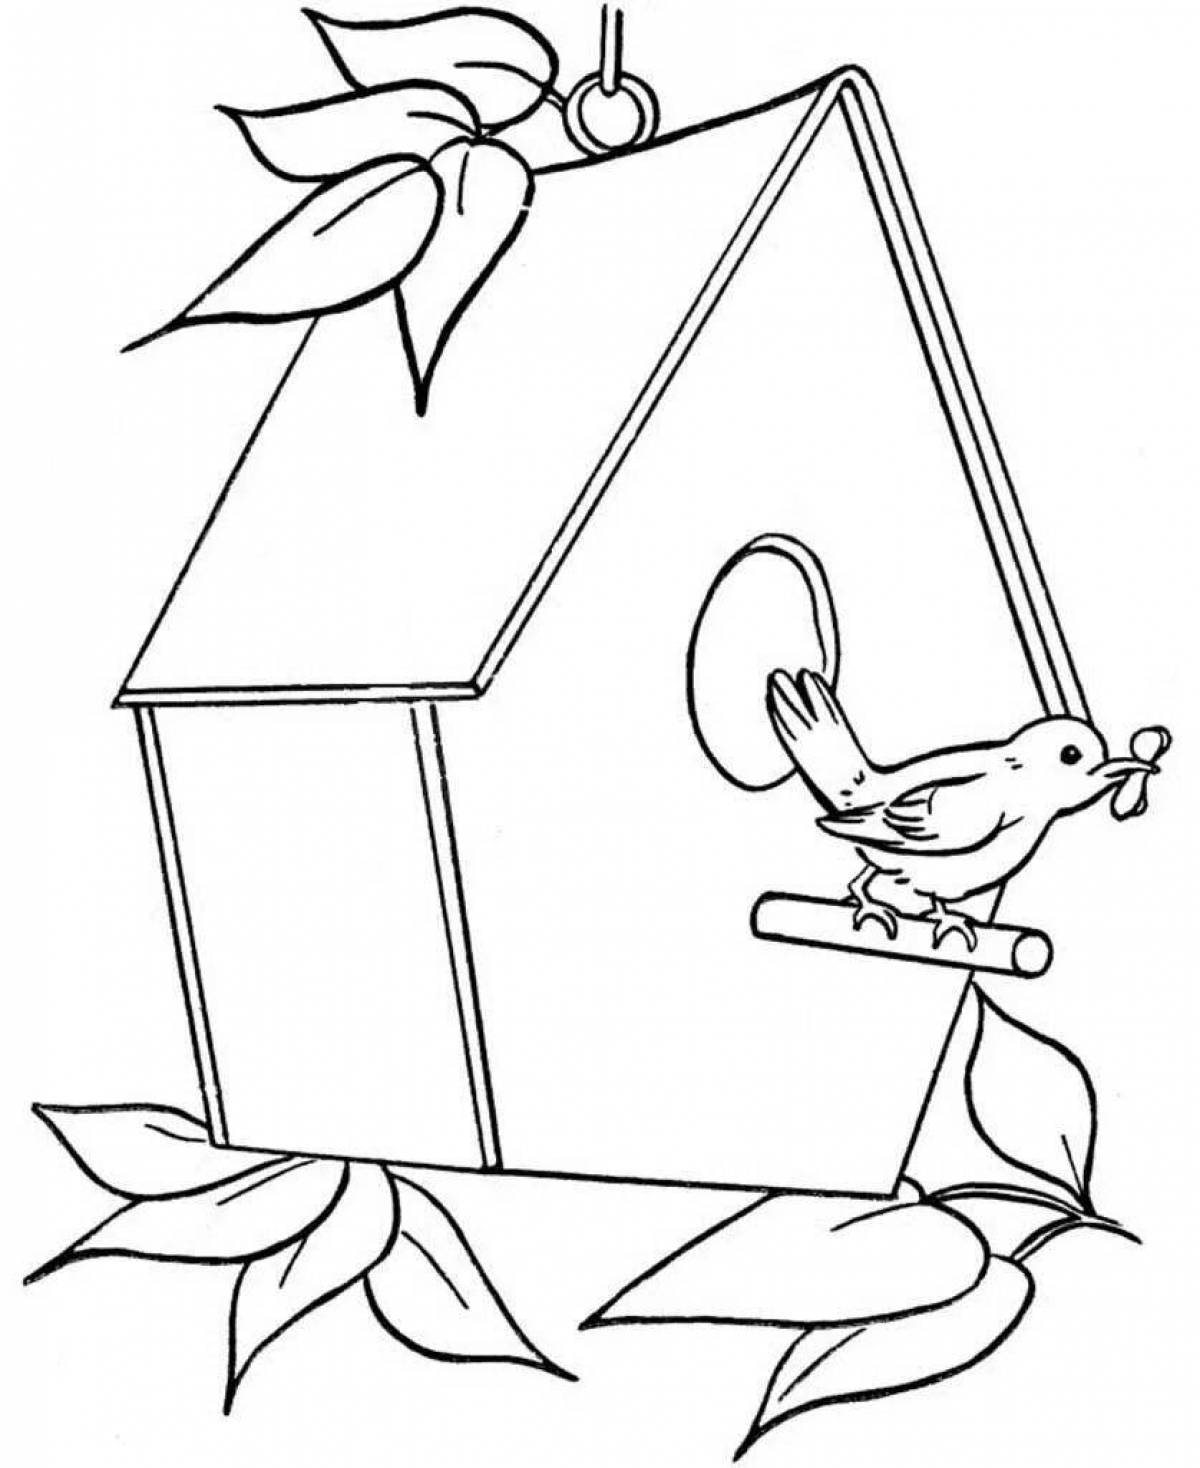 Coloring book colorful bird feeder for children